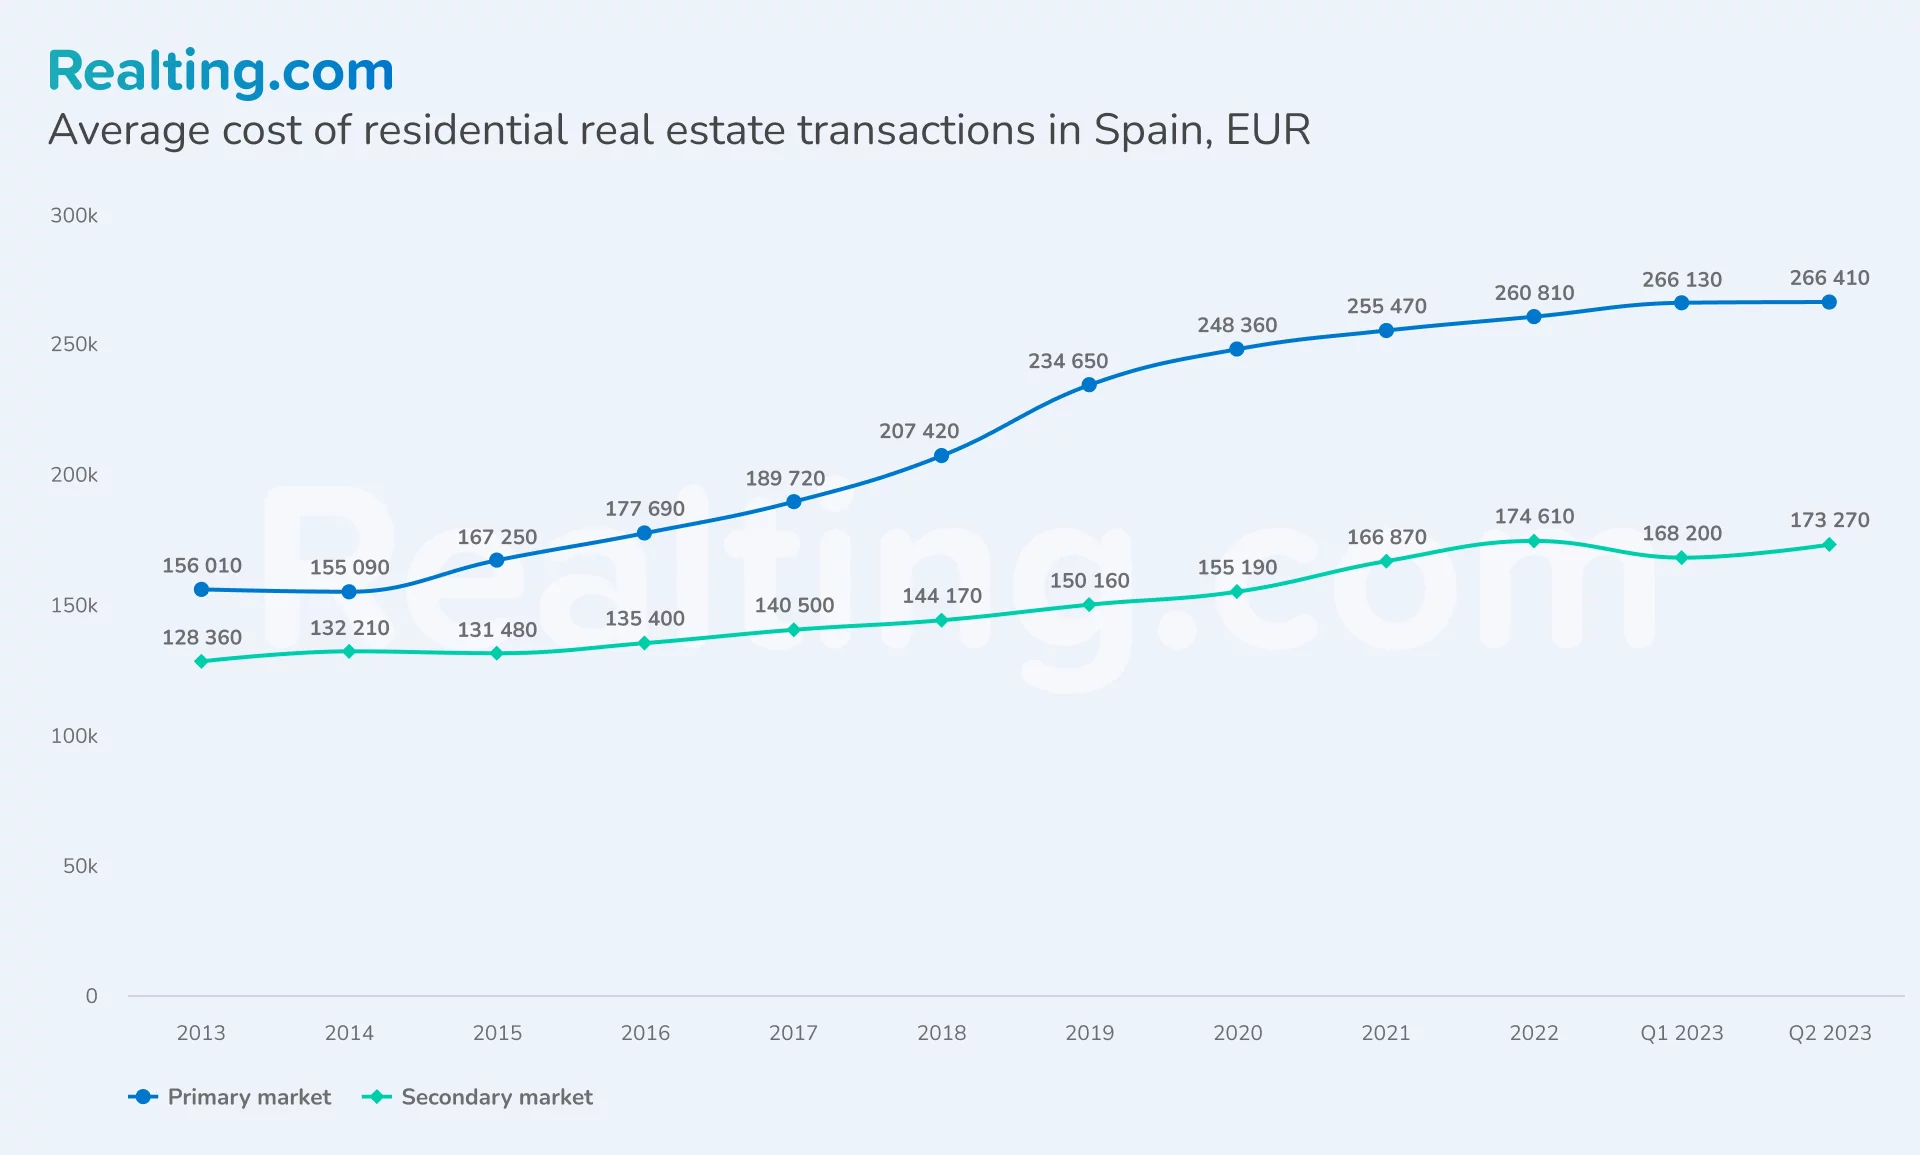 Average cost of residential real estate transactions in Spain, EUR